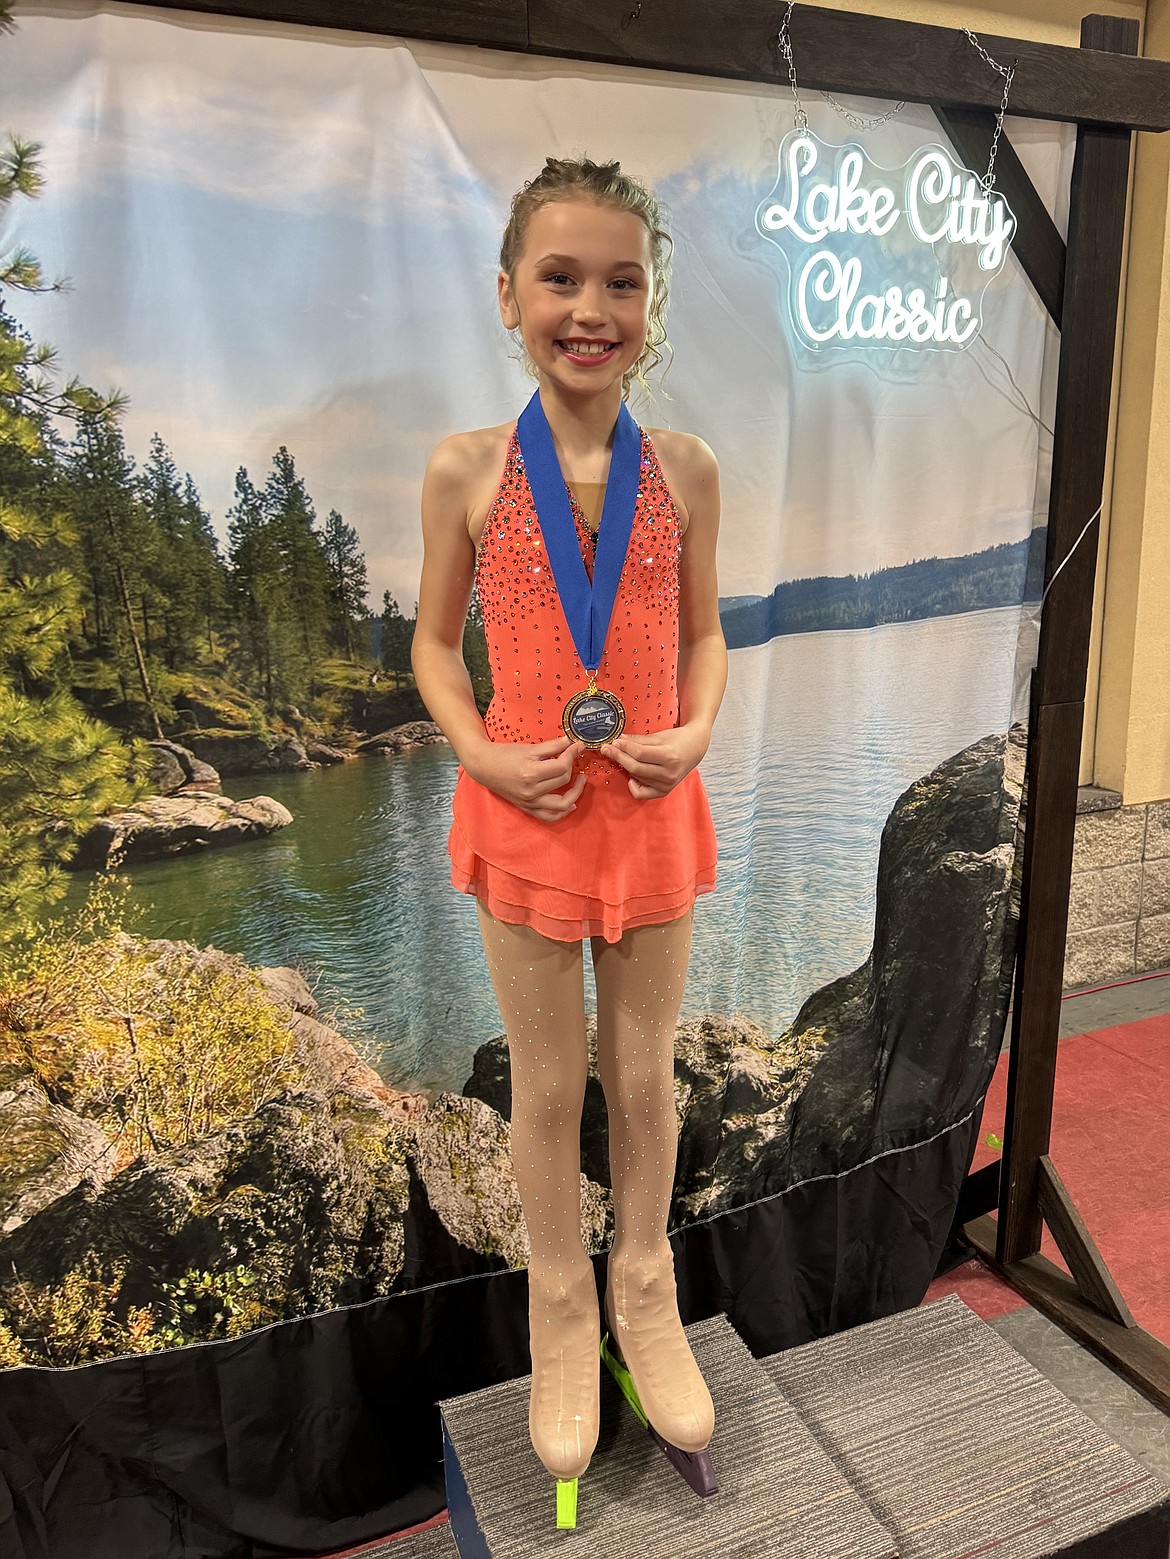 Courtesy photo 
Olivia Graybeal, part of the Lake City Figure Skating program of the Spokane Figure Skating Club, which hosted the Lake City Classic on May 17-19 at the Frontier Ice Arena in Coeur d'Alene.